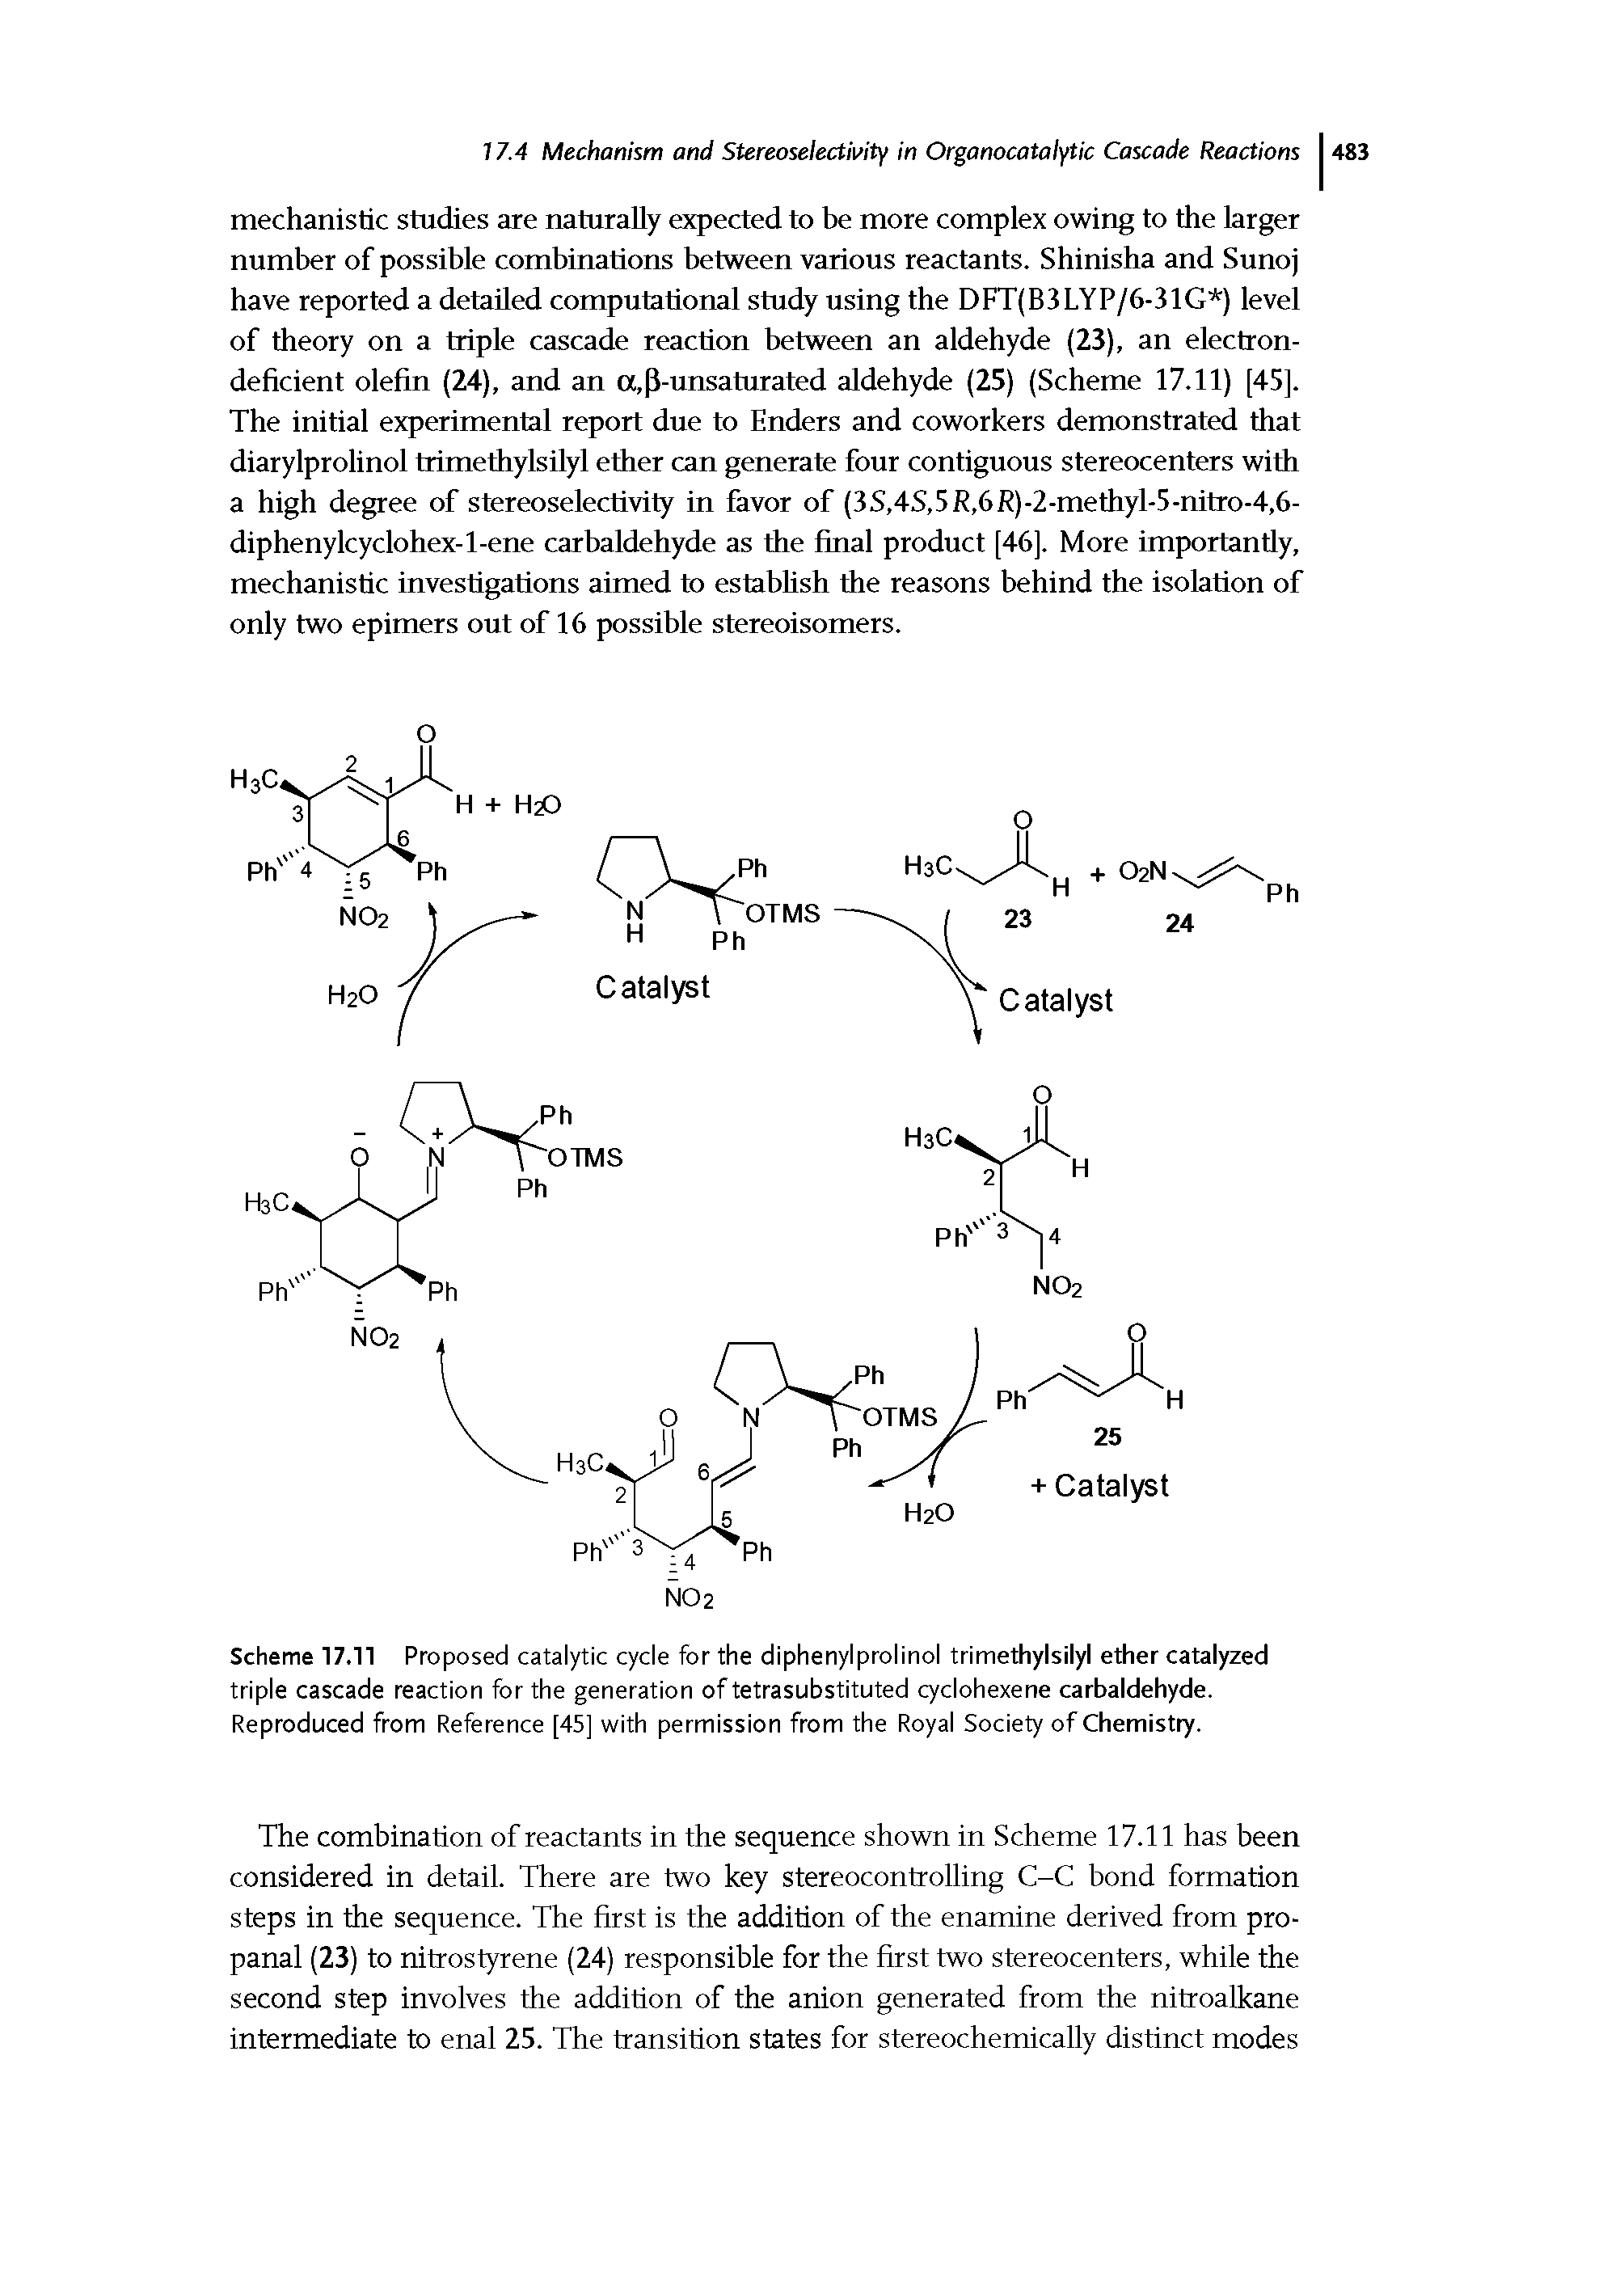 Scheme 17.11 Proposed catalytic cycle for the diphenylprolinol trimethylsilyl ether catalyzed triple cascade reaction for the generation of tetrasubstituted cyclohexene carbaldehyde. Reproduced from Reference [45] with permission from the Royal Society of Chemistry.